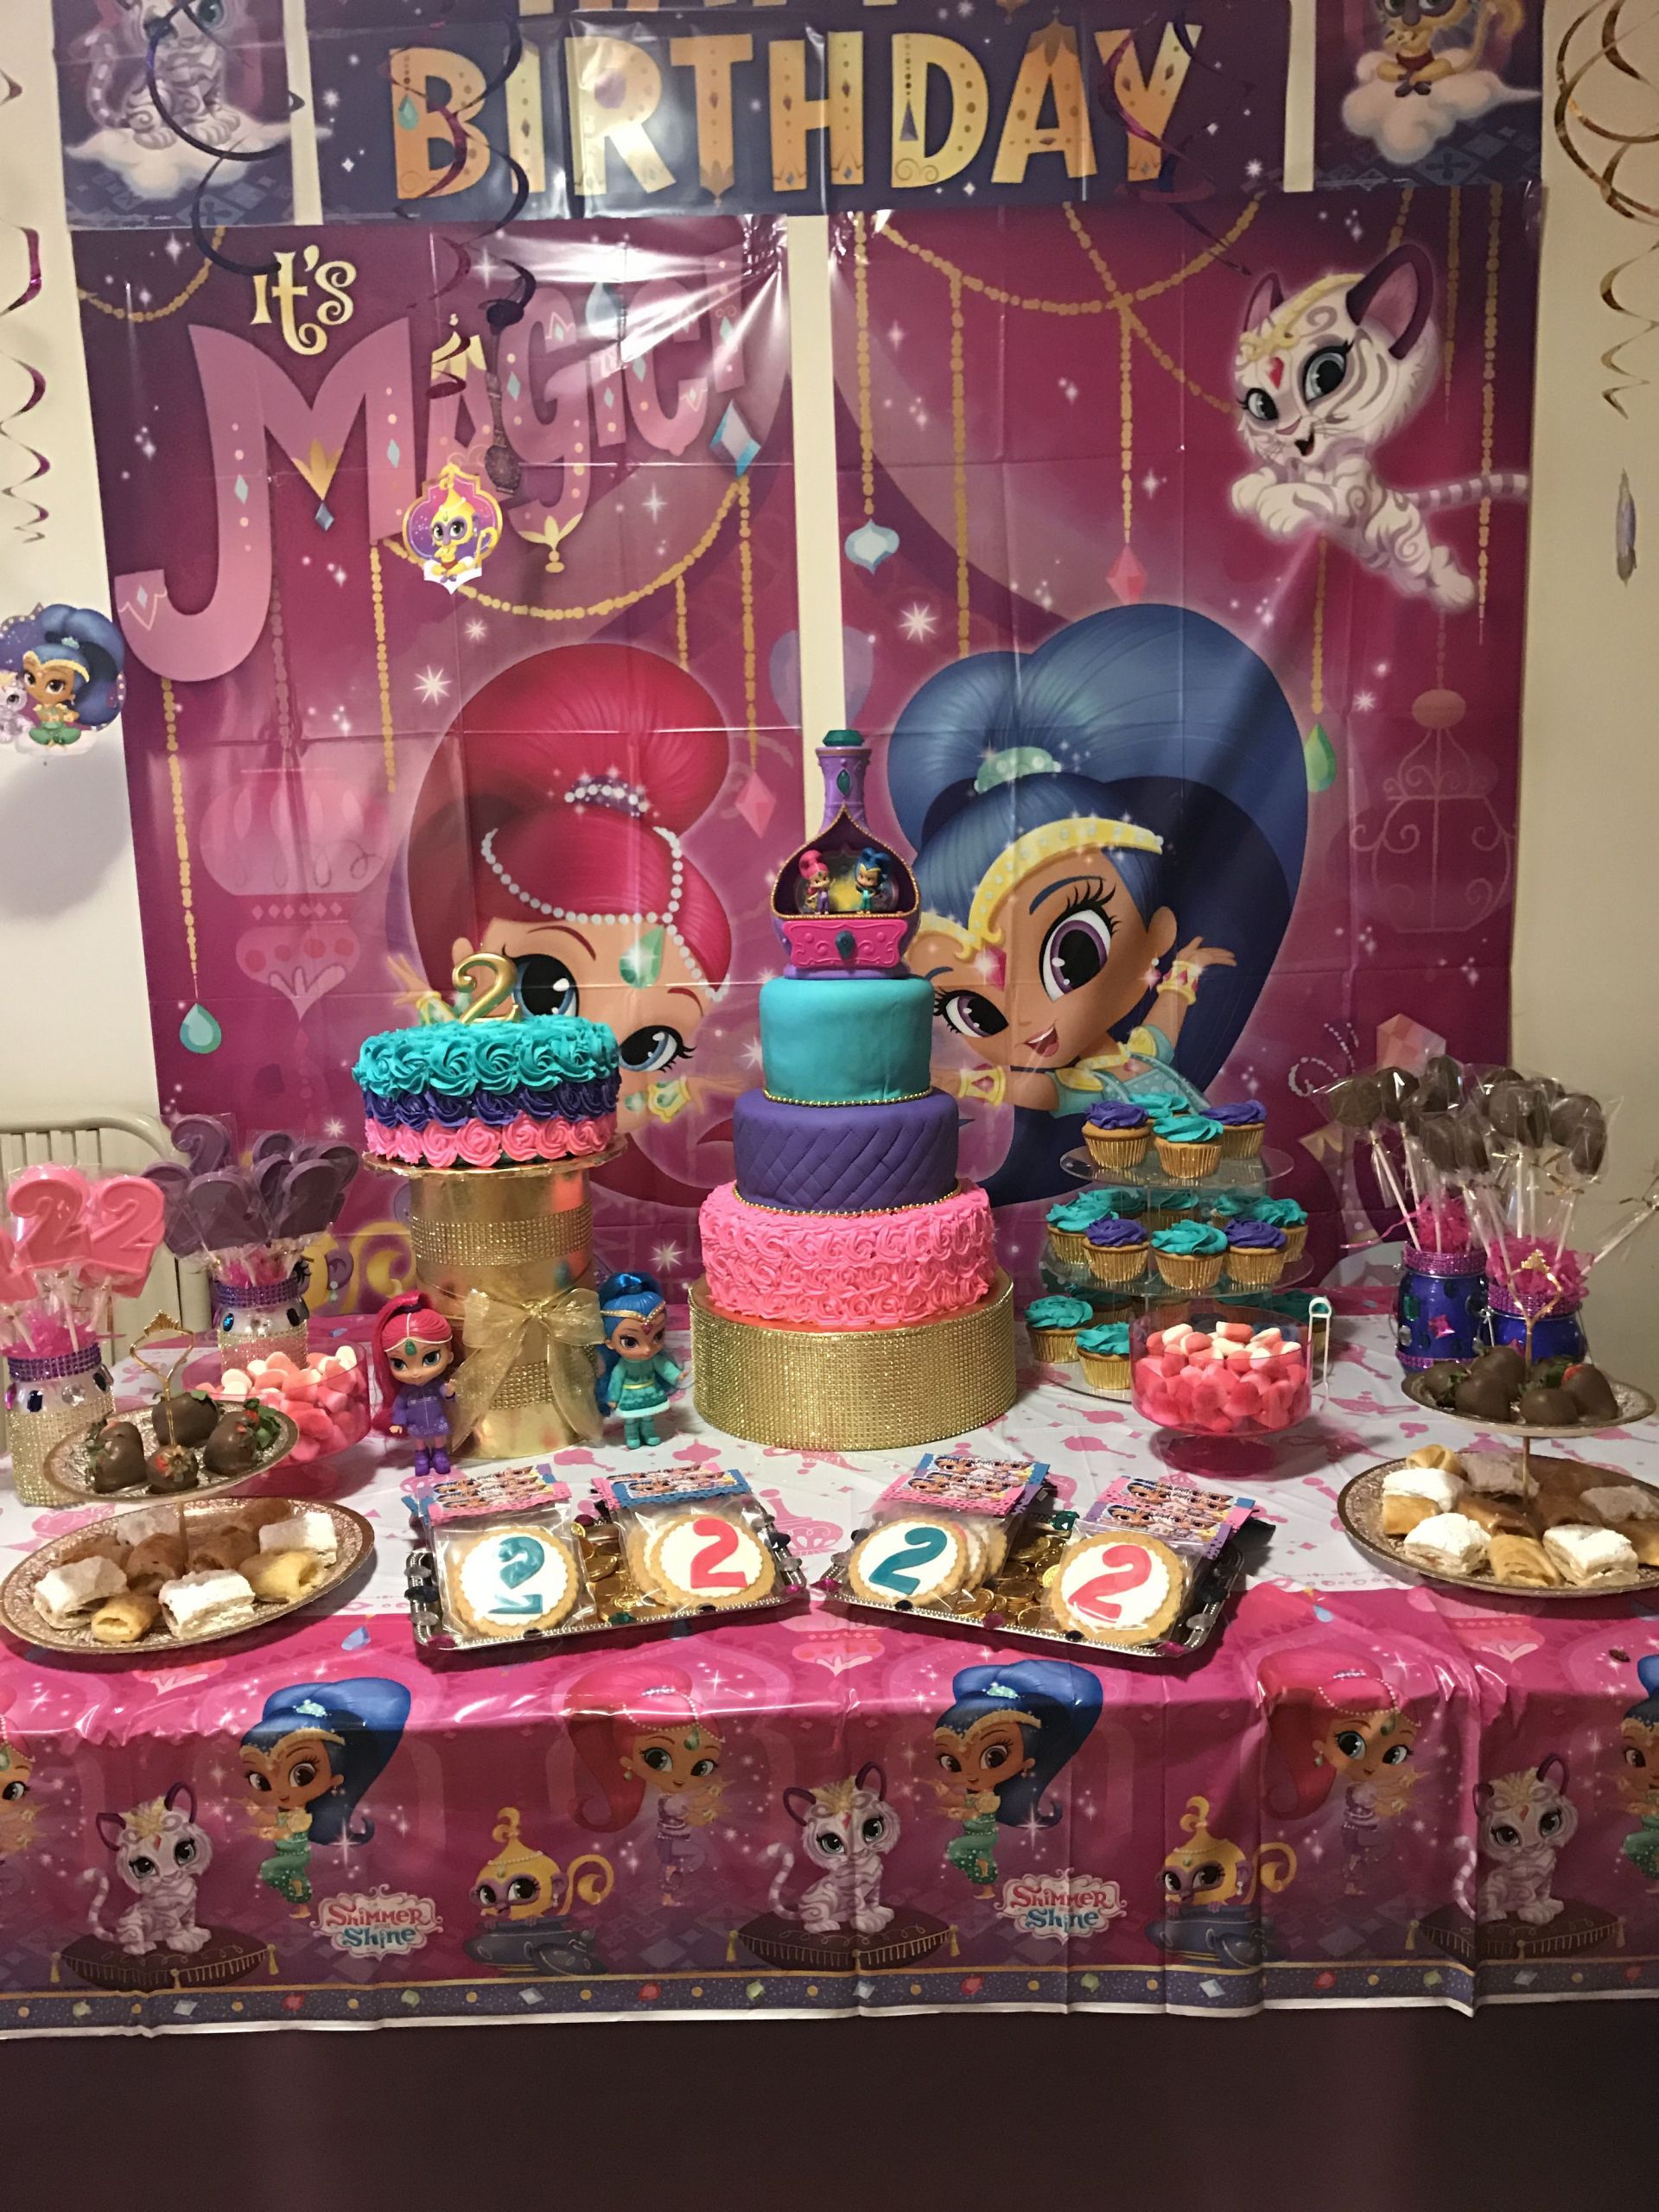 Shimmer And Shine Birthday Party Ideas
 Shimmer & shine Birthday Party